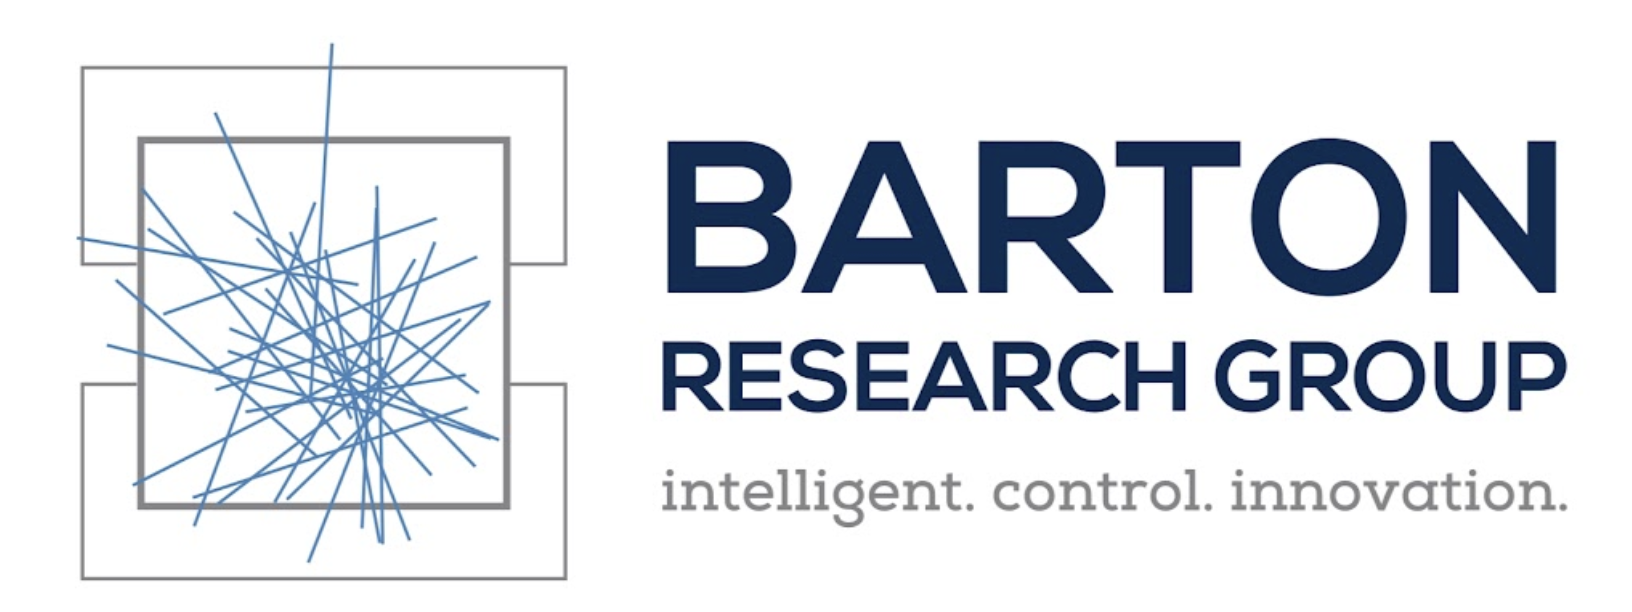 Barton Research Group